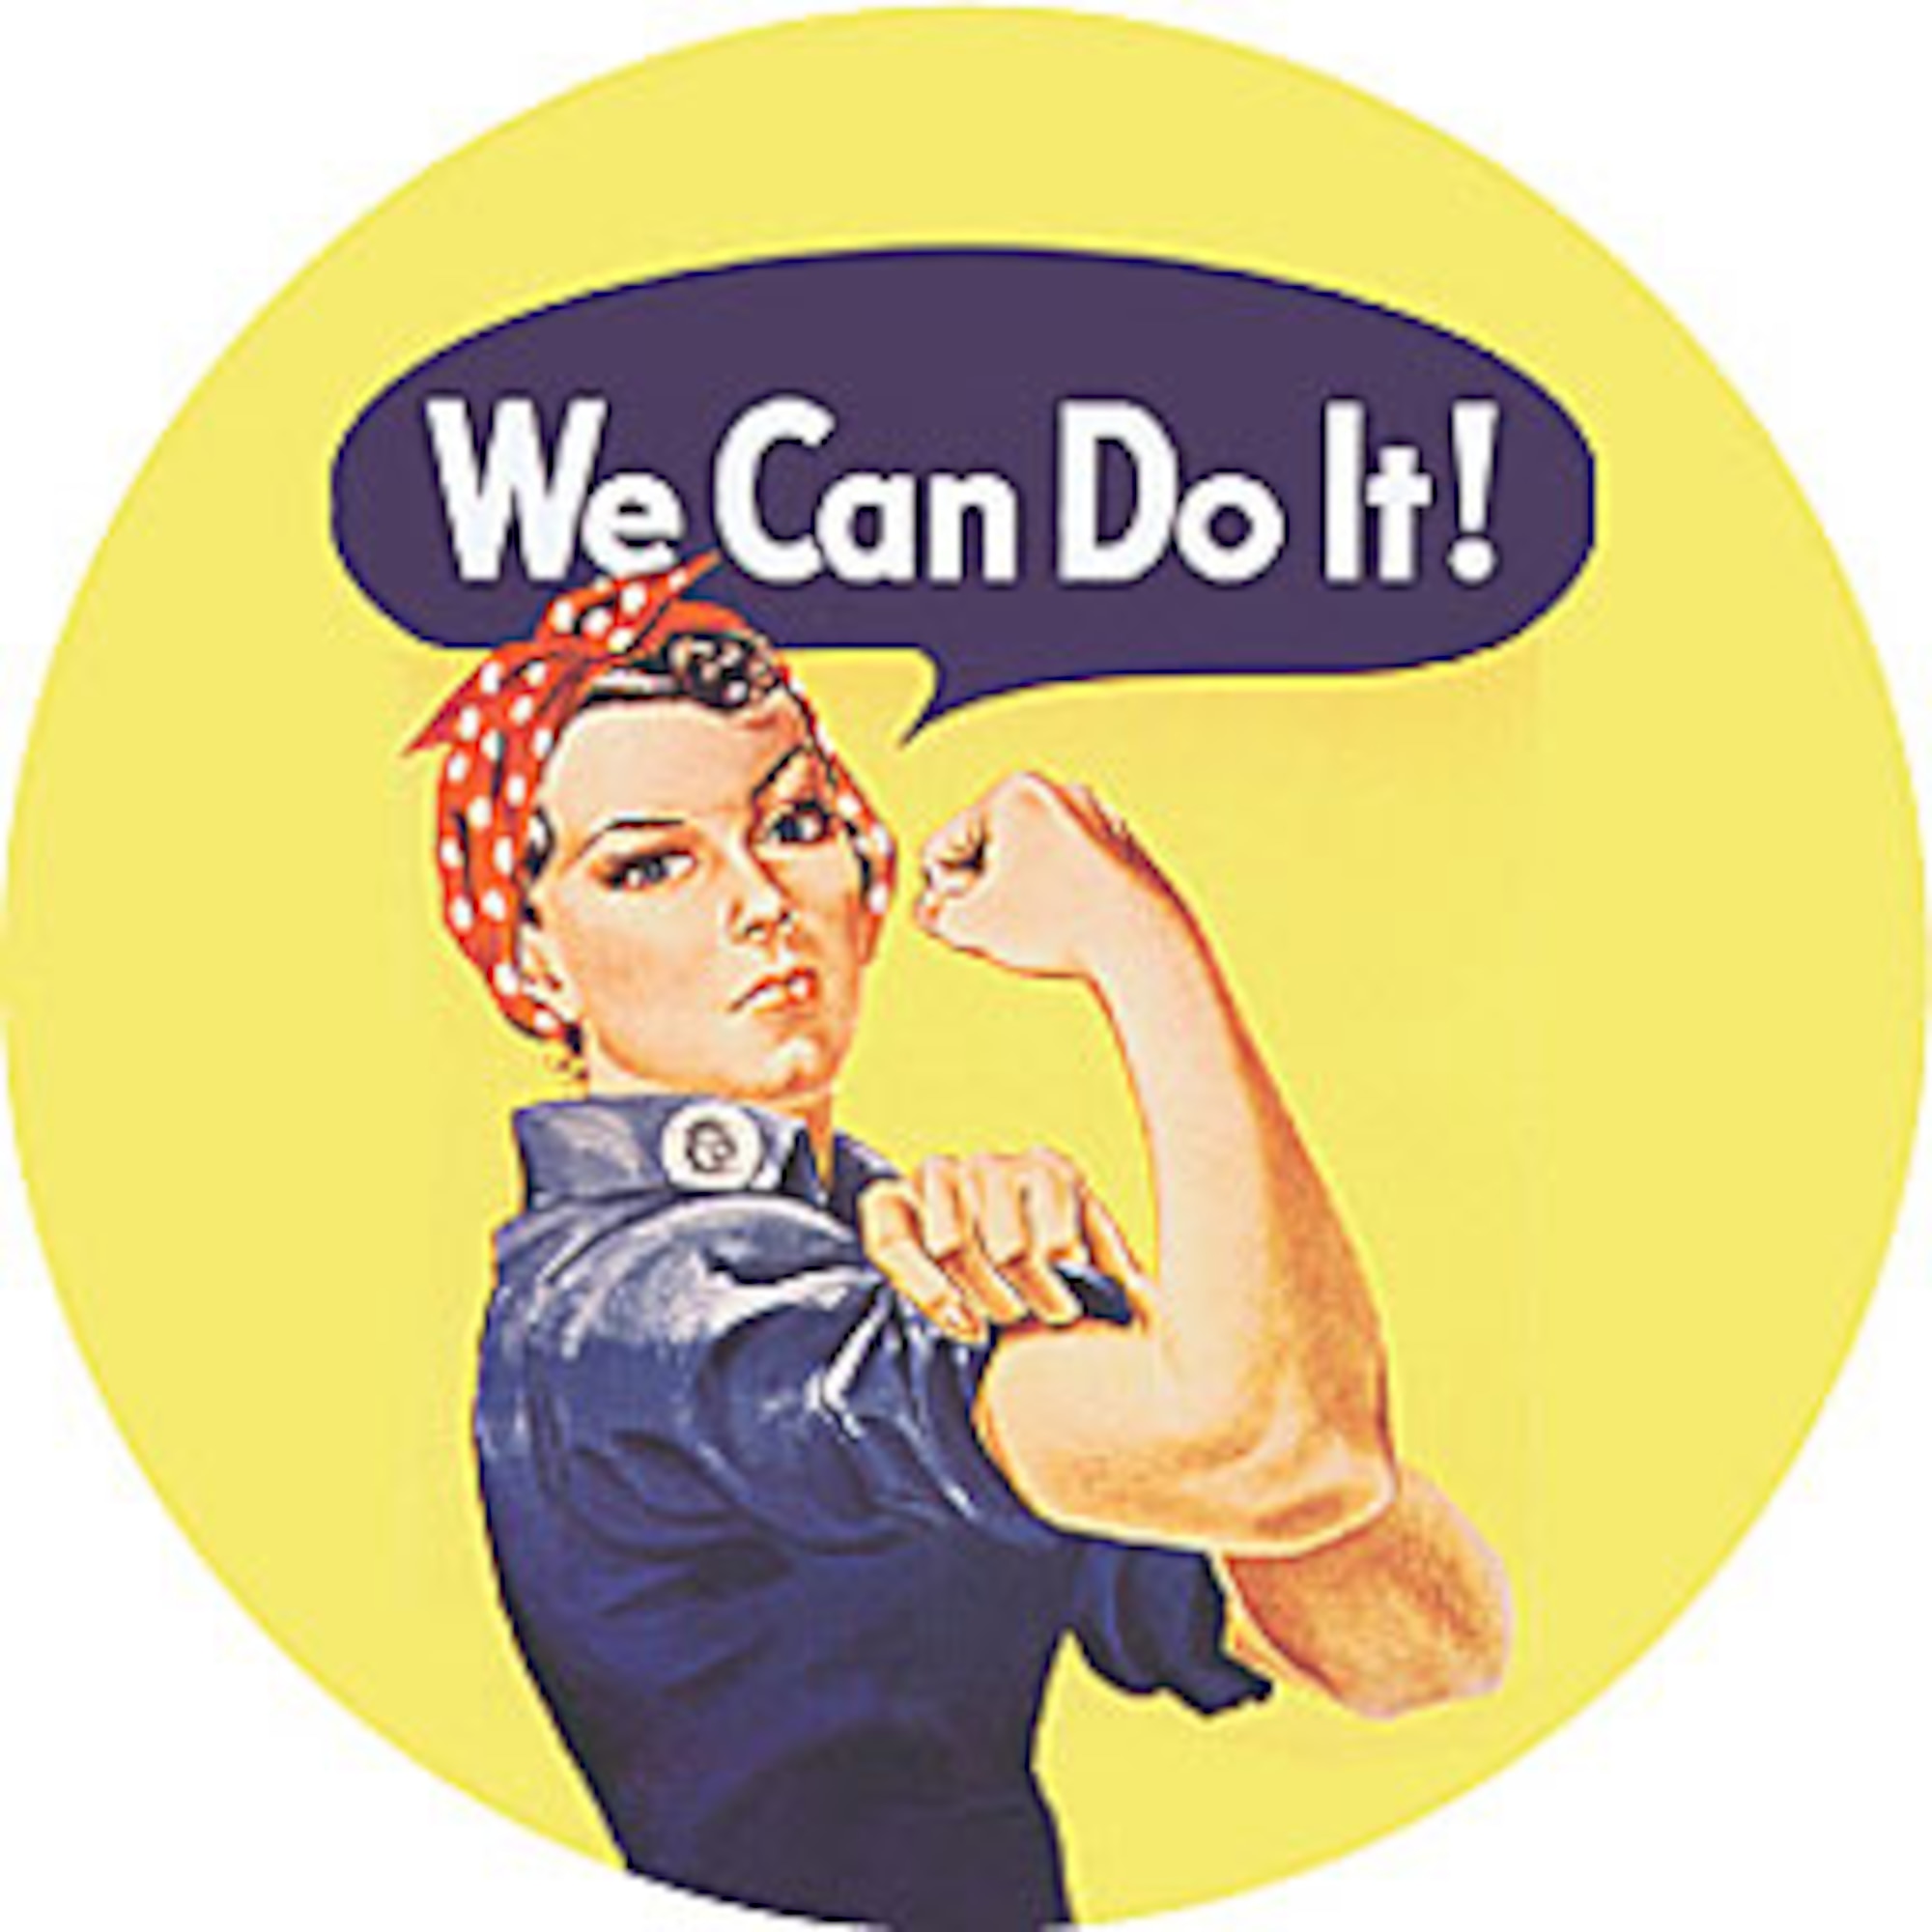 We can make it better. Плакат «we can do it! ». Плакаты в стиле we can do it. Женщина we can do it. Плакат феминистка we can do it.